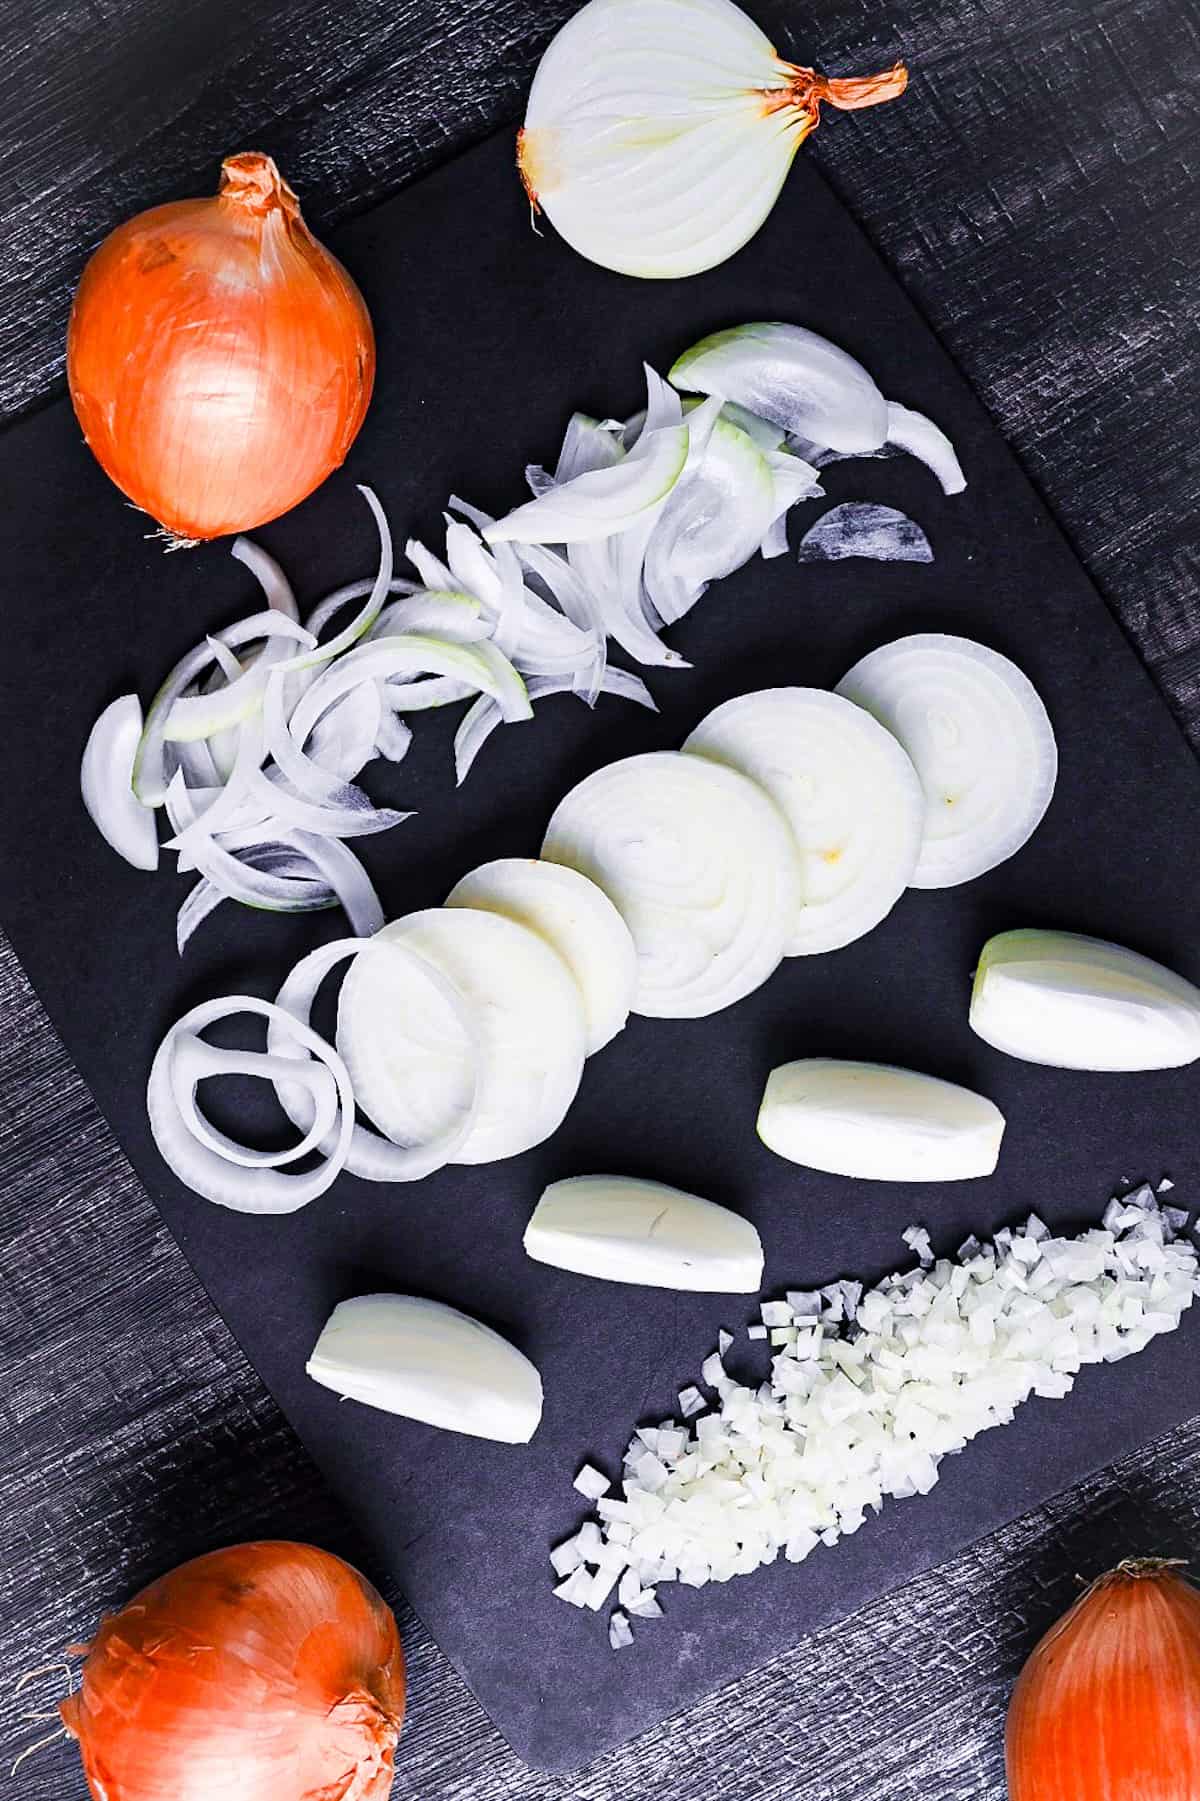 onion cut using different methods on a black chopping board - thinly sliced, thick rounds, wedges and finely diced